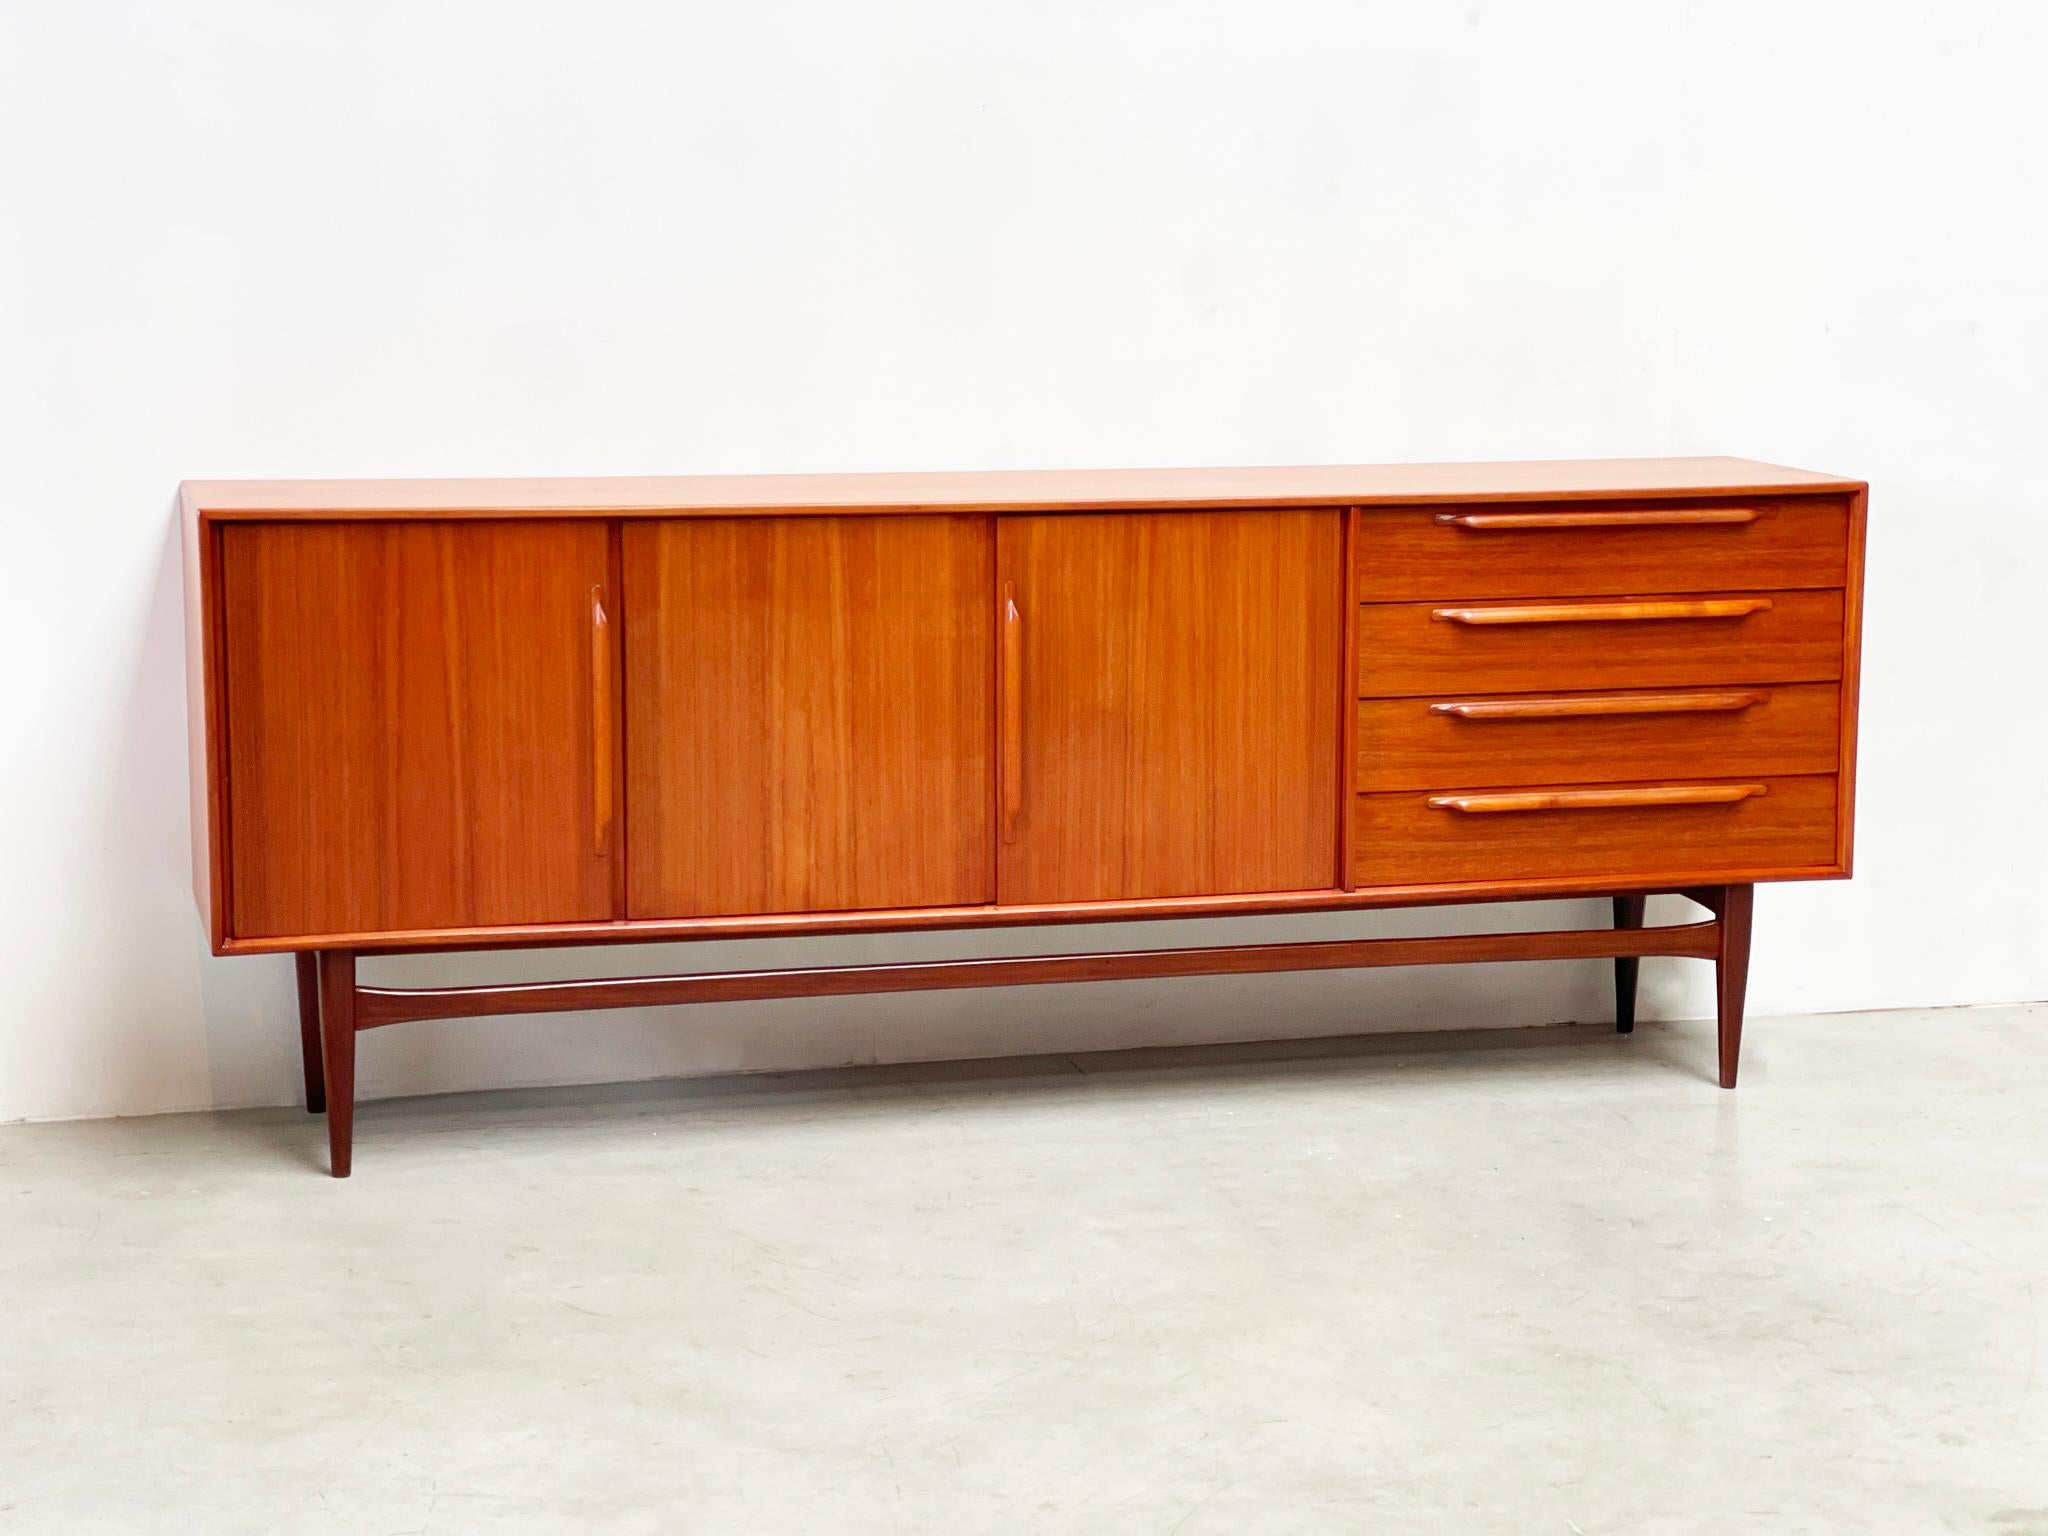 Elevate your space with the timeless elegance of the Teak Type 214 Sideboard by Heinrich Riestenpatt, manufactered by RT Möbel in 1960s Germany. Meticulously restored to perfection, this iconic piece seamlessly blends mid-century charm with modern